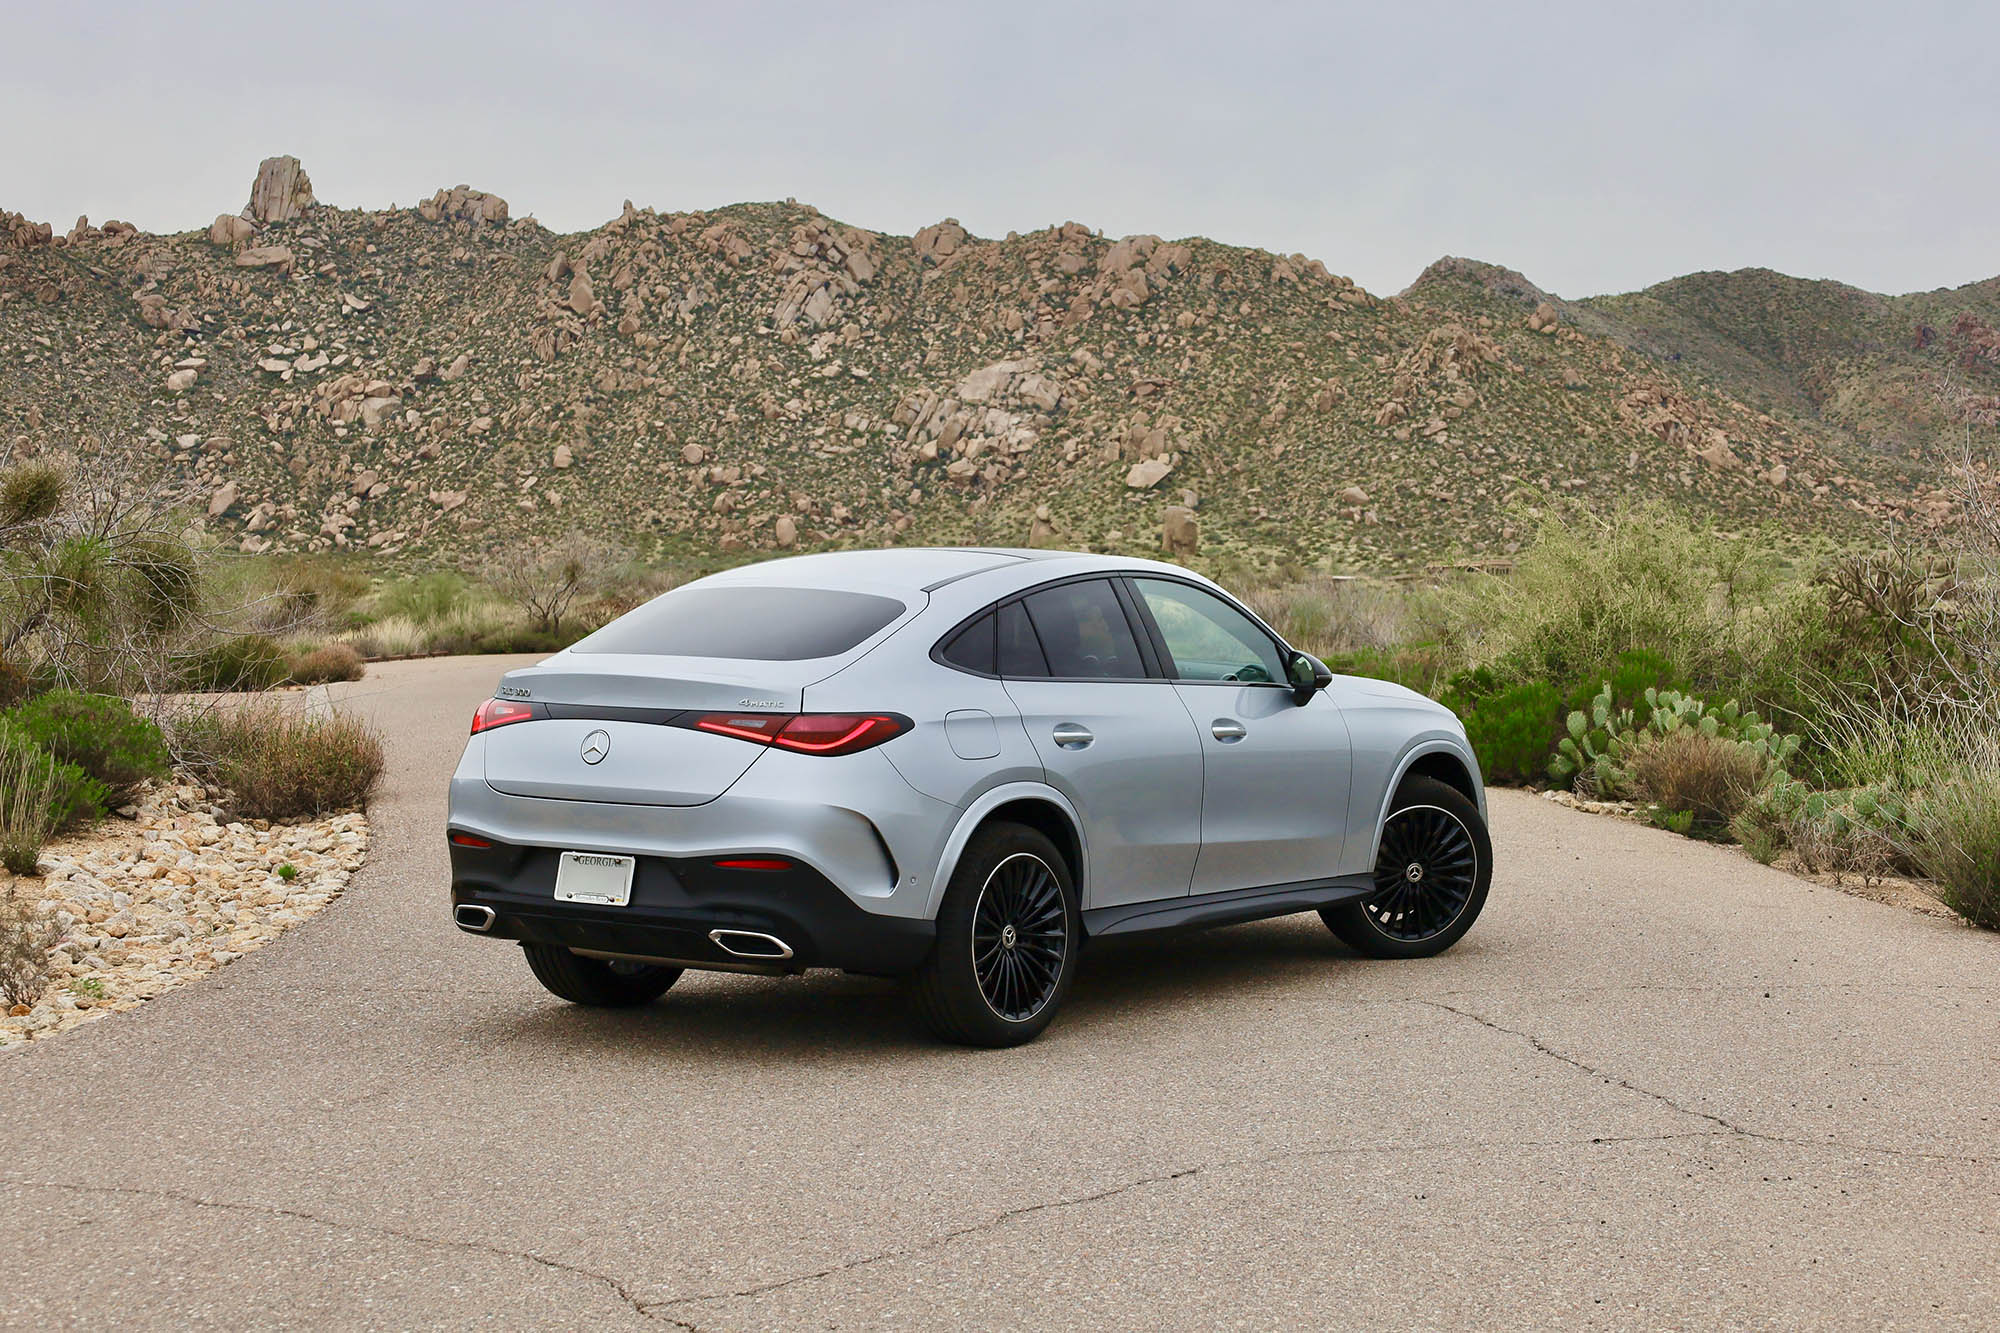 Rear-quarter view of a silver 2024 Mercedes-Benz GLC 300 parked on the pavement in the Arizona desert with mountains in the background.